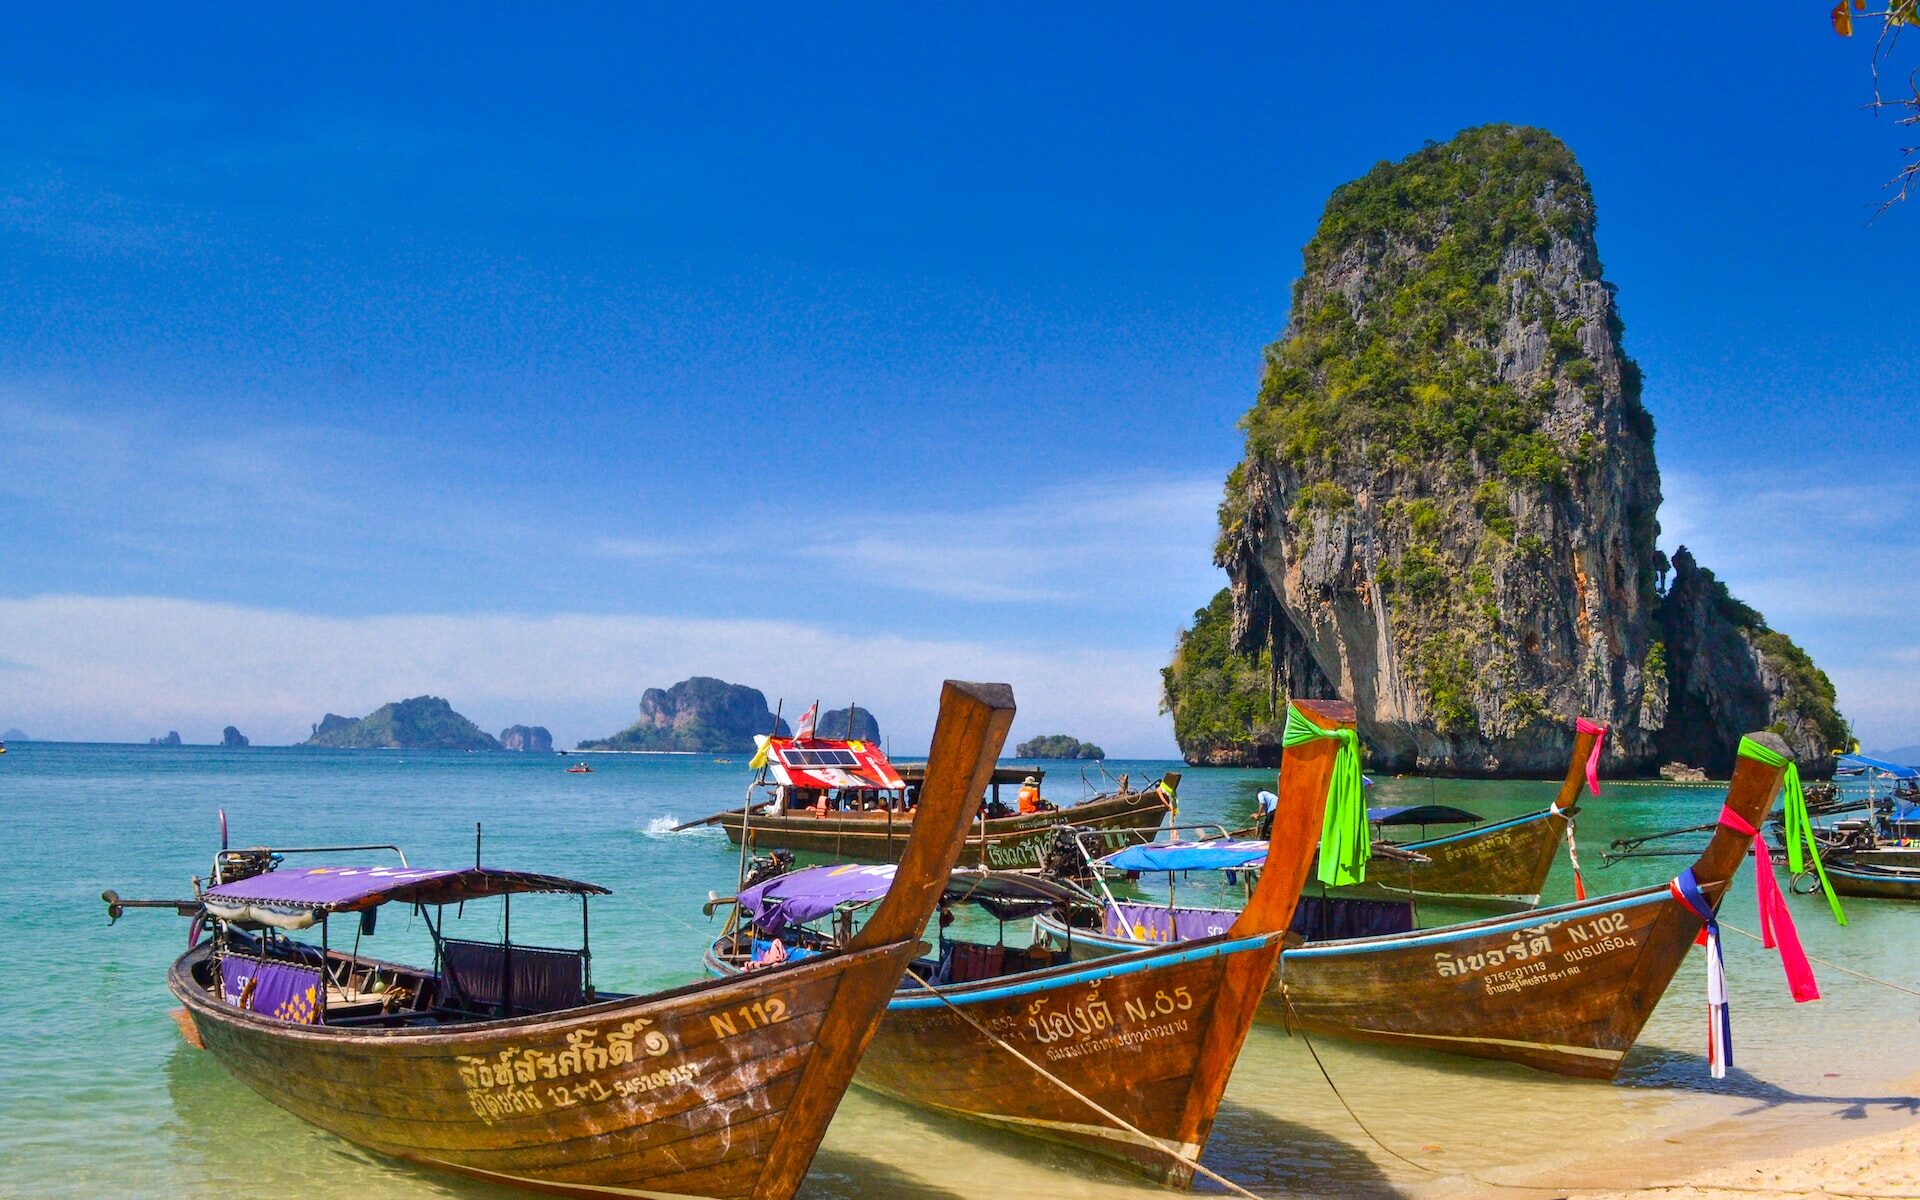 Boats on the beach in Thailand